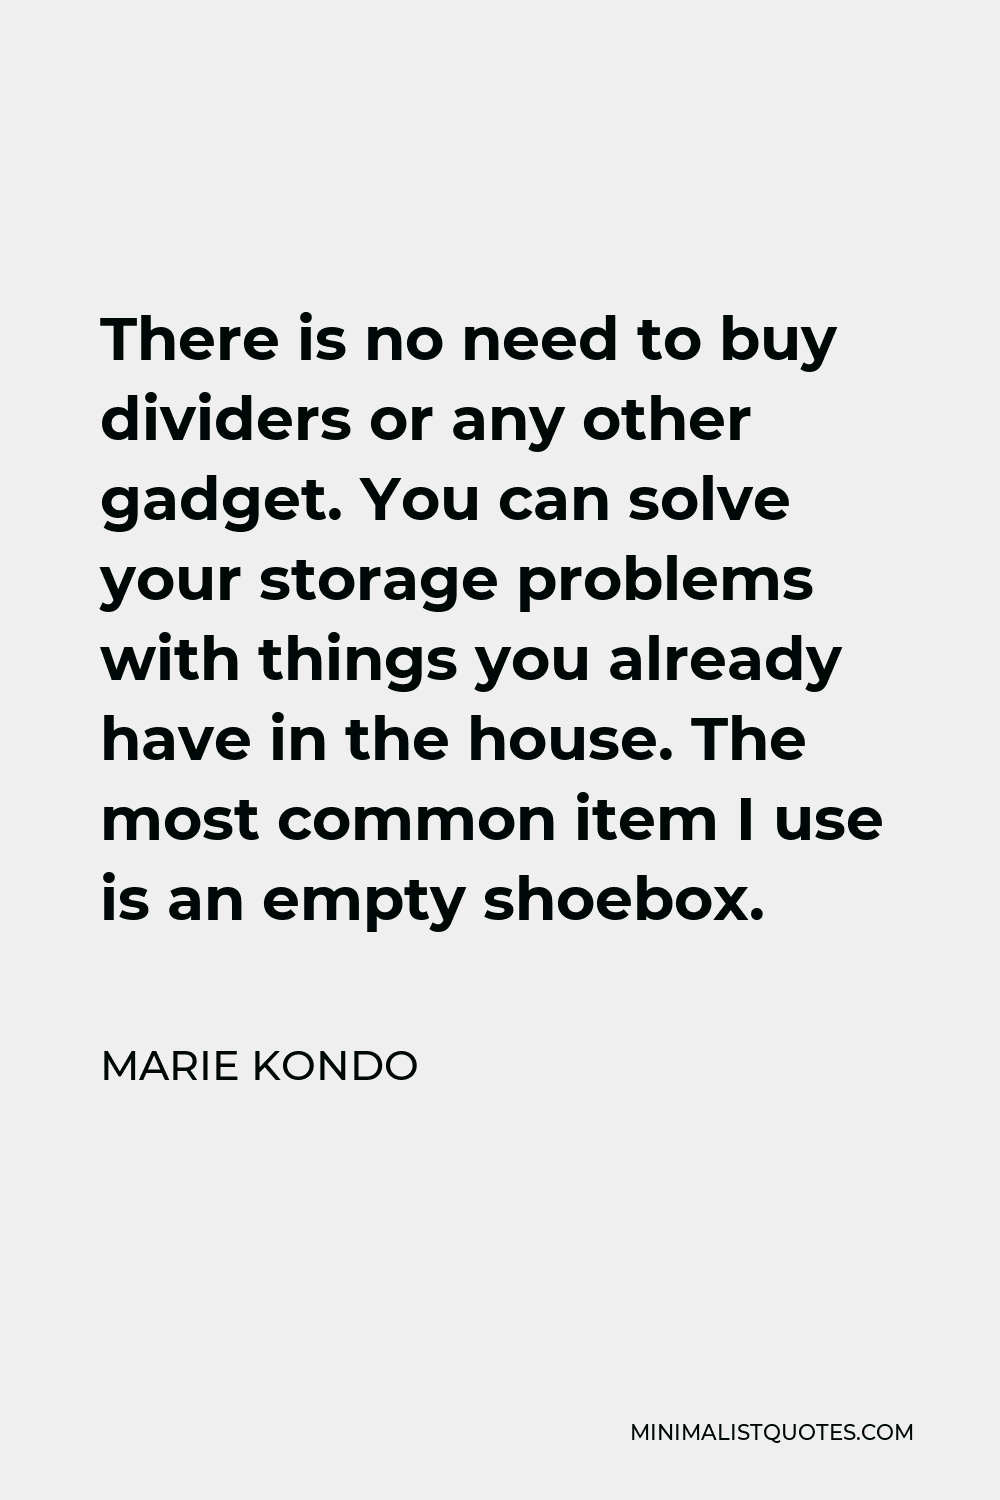 Marie Kondo Quote - There is no need to buy dividers or any other gadget. You can solve your storage problems with things you already have in the house. The most common item I use is an empty shoebox.